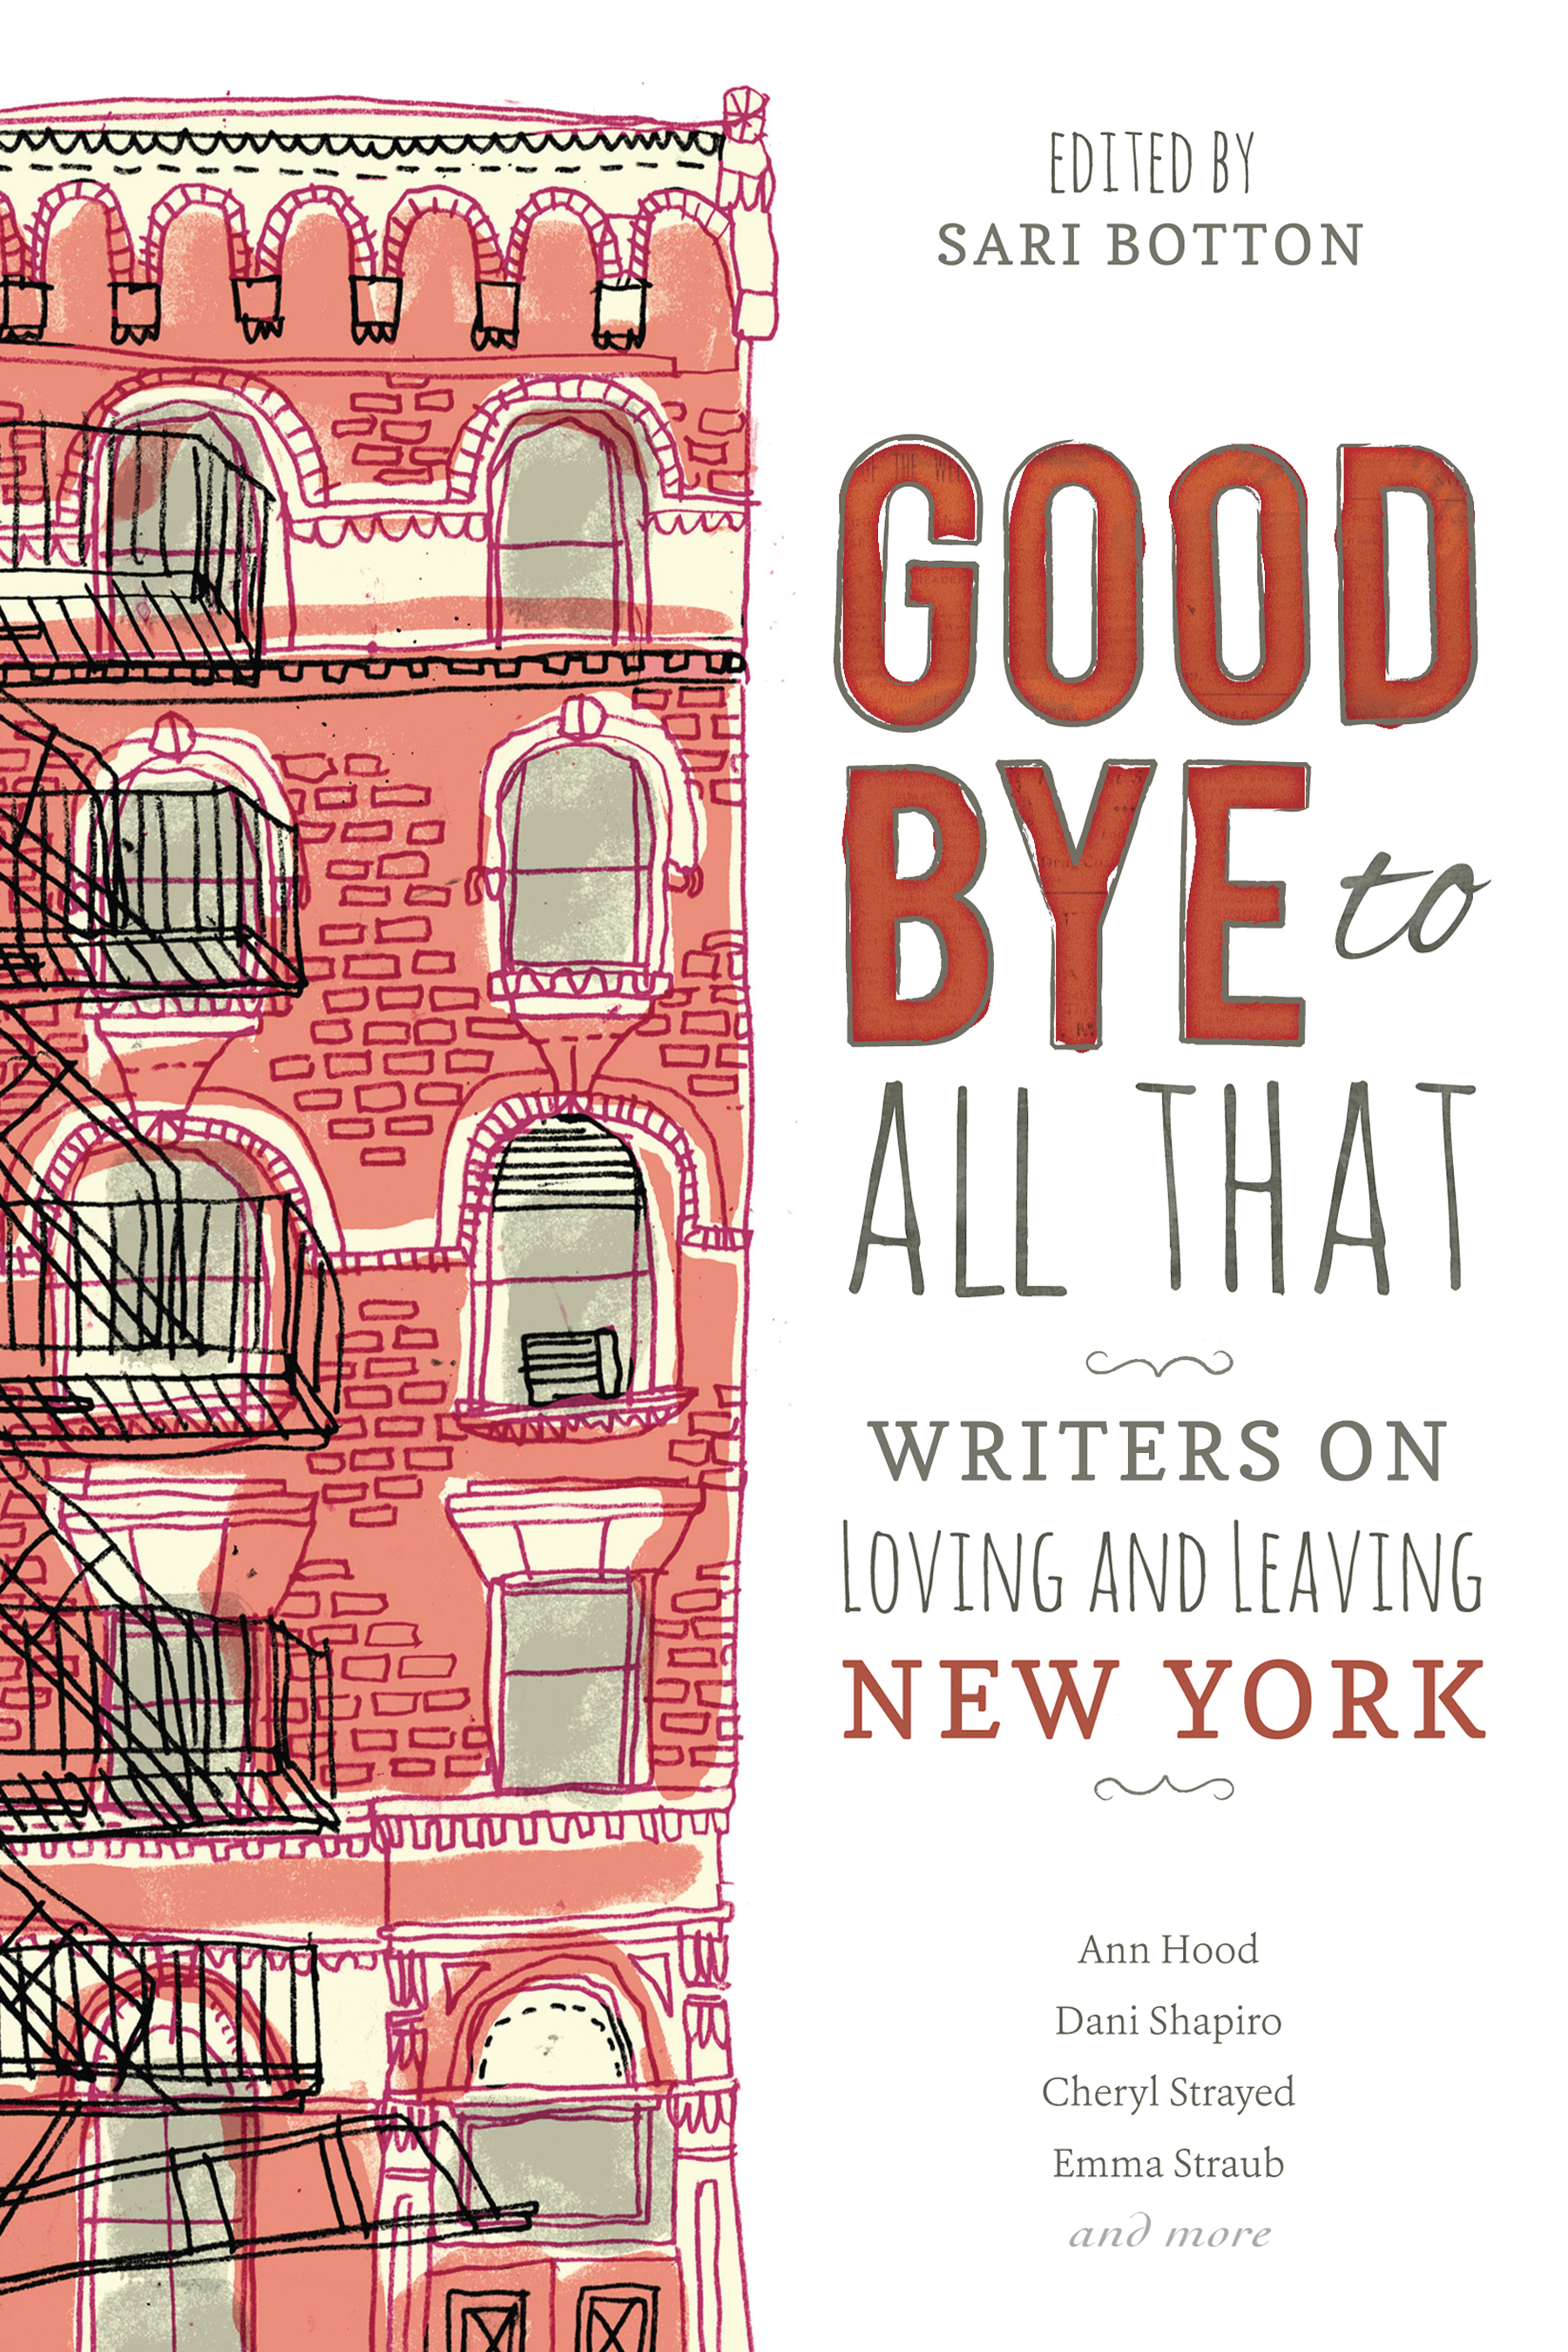 Book Launch: Goodbye to All That: Writers on Loving and Leaving New York edited by Sari Botton, with Meghan Daum, Emily Gould, Emily Carter Roiphe and Melissa Febos